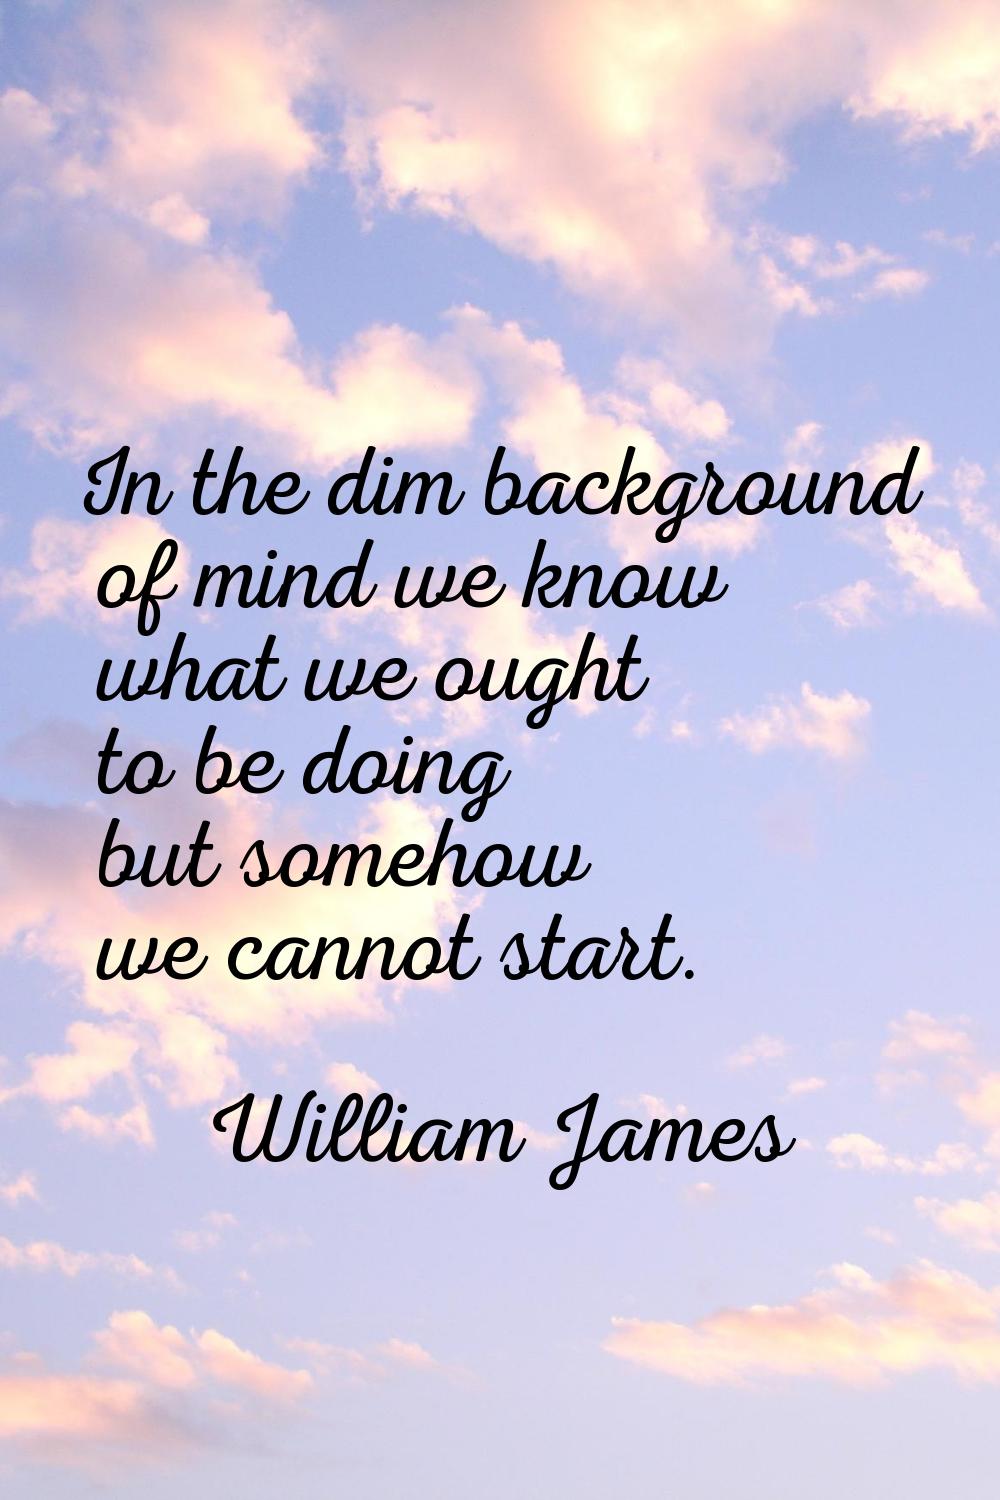 In the dim background of mind we know what we ought to be doing but somehow we cannot start.